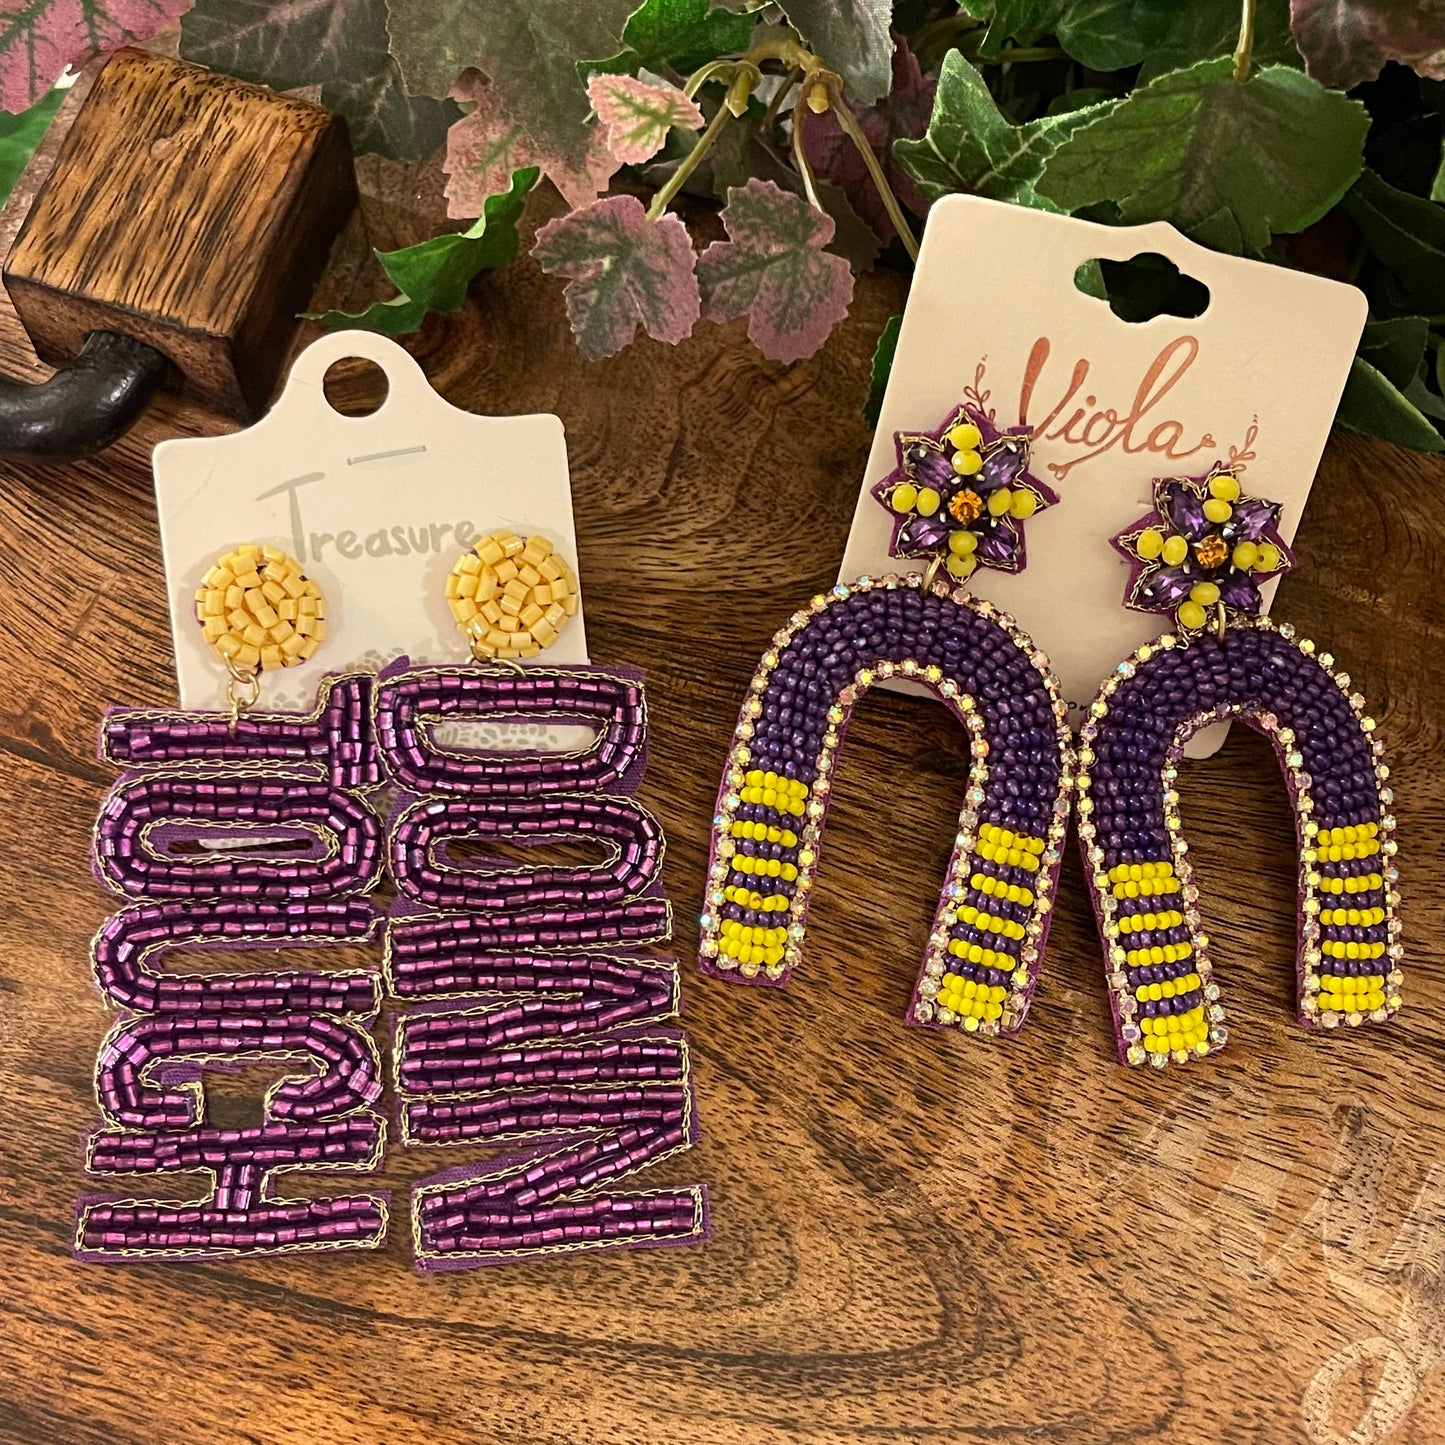 Tigers Statement Seed Bead Post Style Earrings